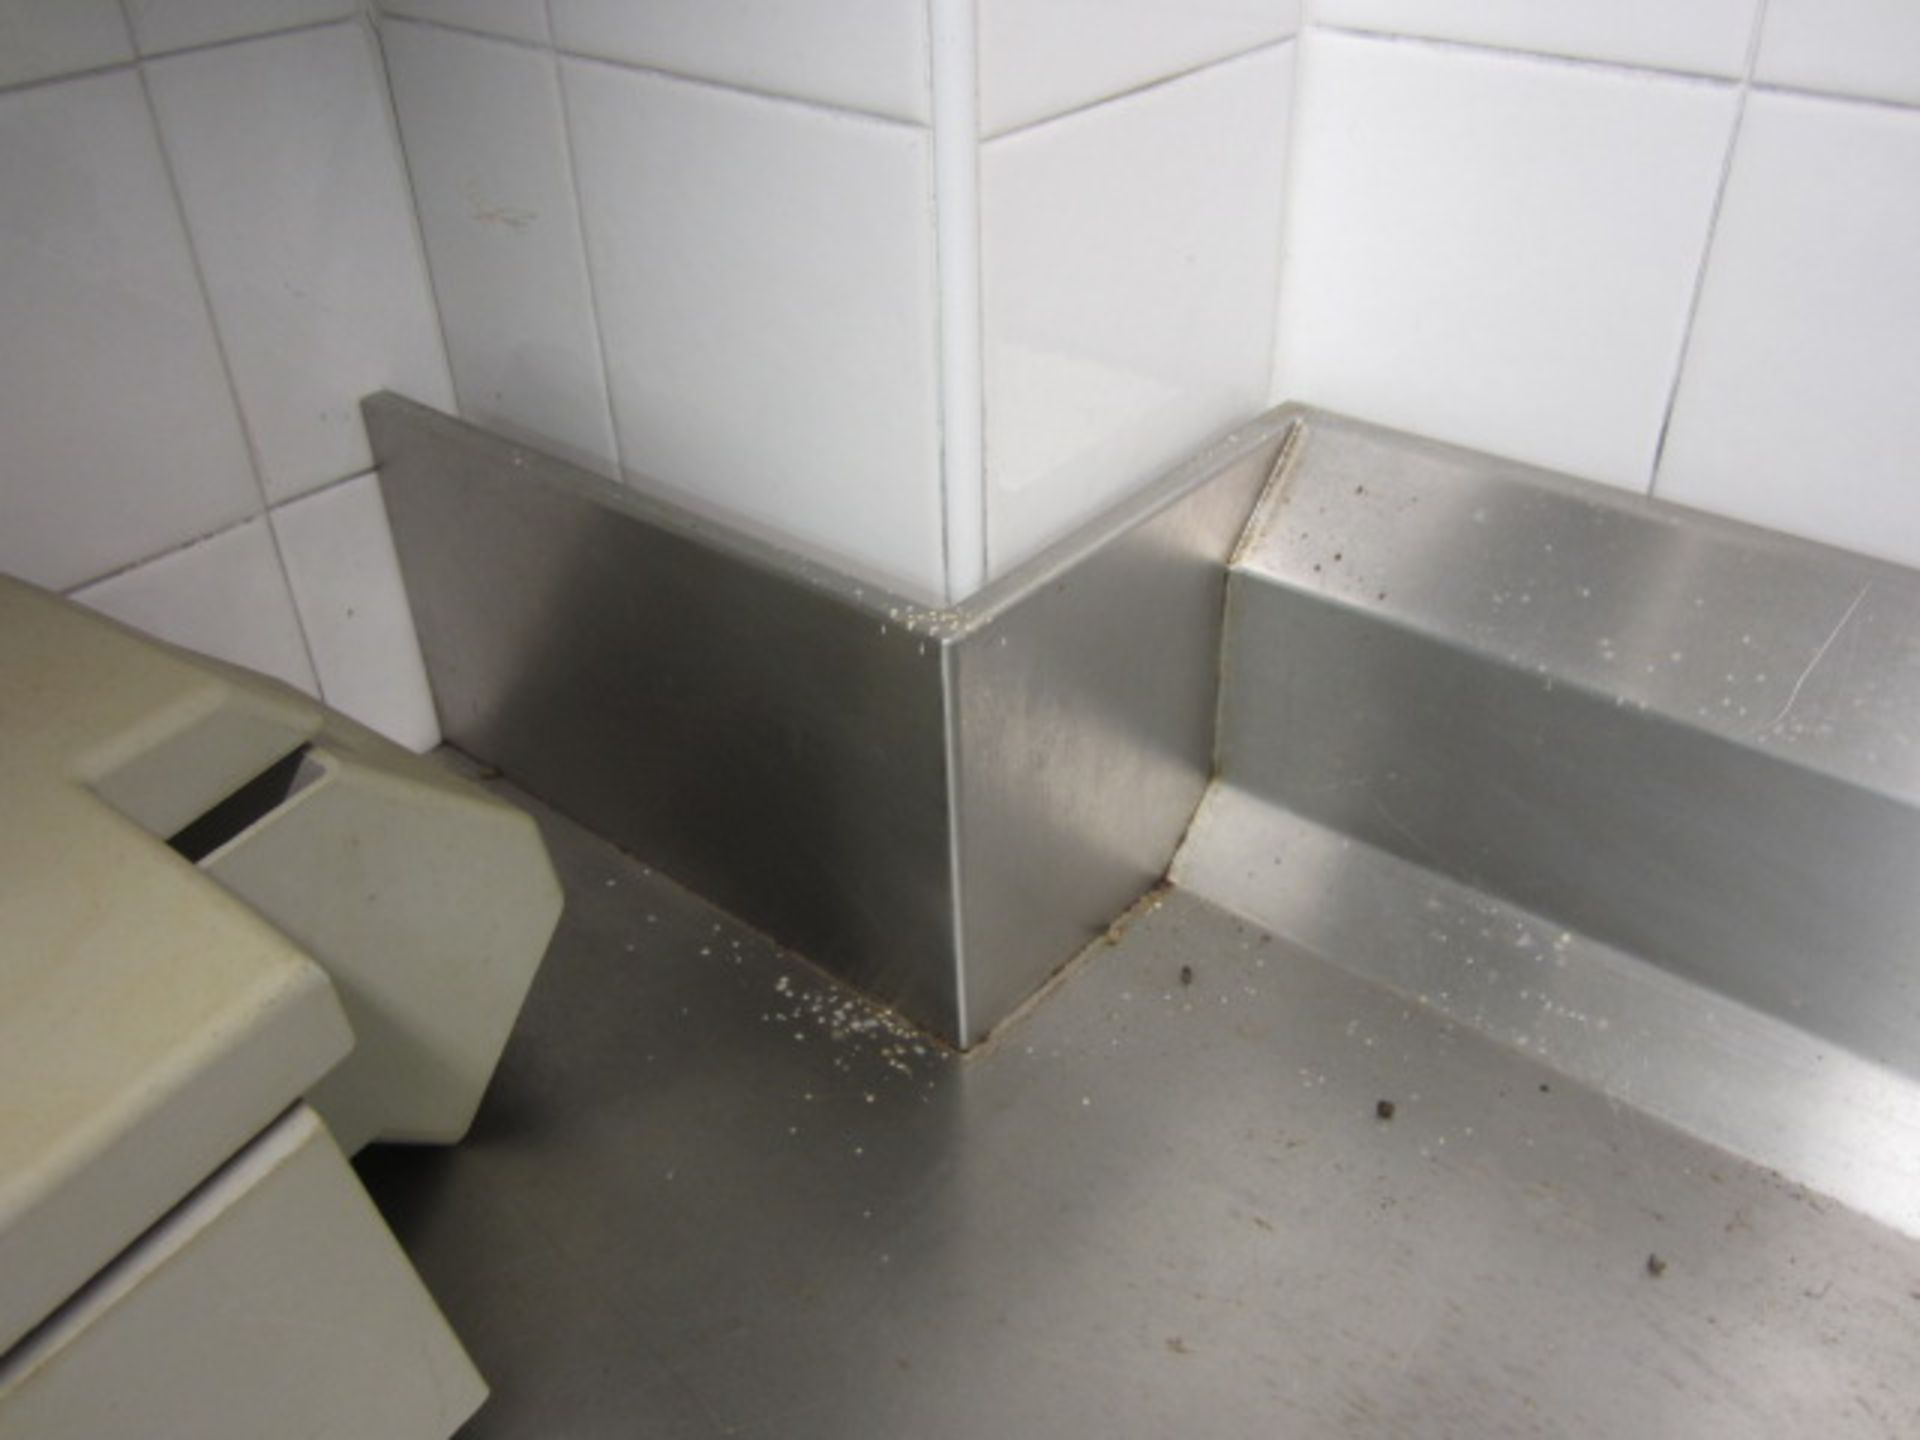 Stainless steel preparation table with undershelf, splash back, 1.4m x 650, cut out to one corner - Image 2 of 3